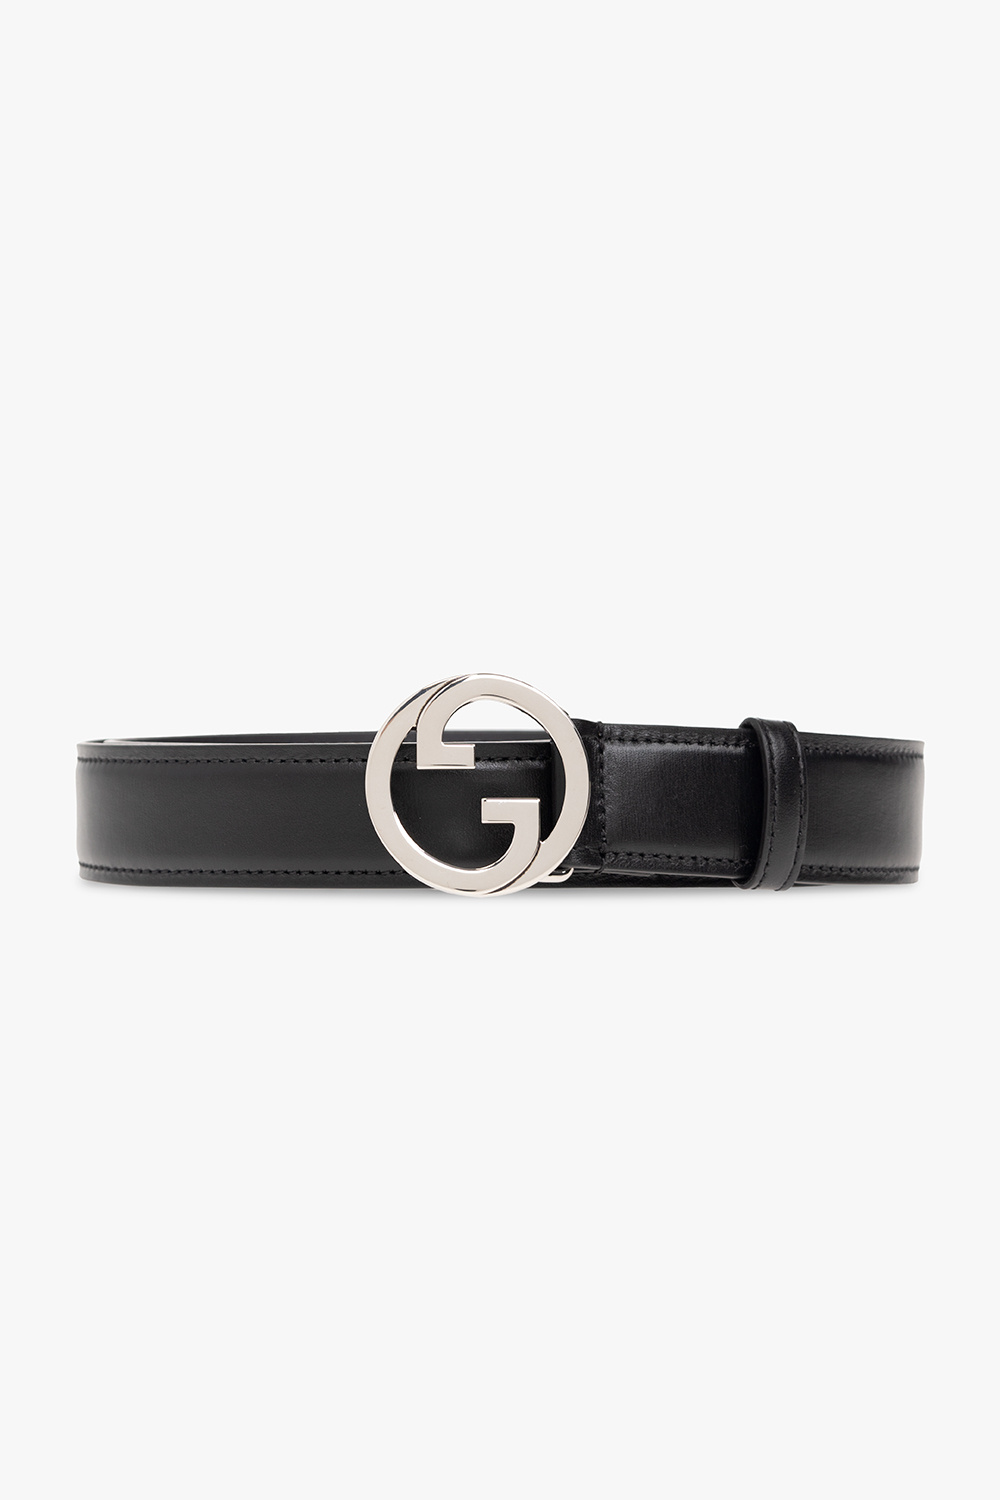 Gucci Belt with Square Buckle and Interlocking G, Size Gucci 105, Black, Leather